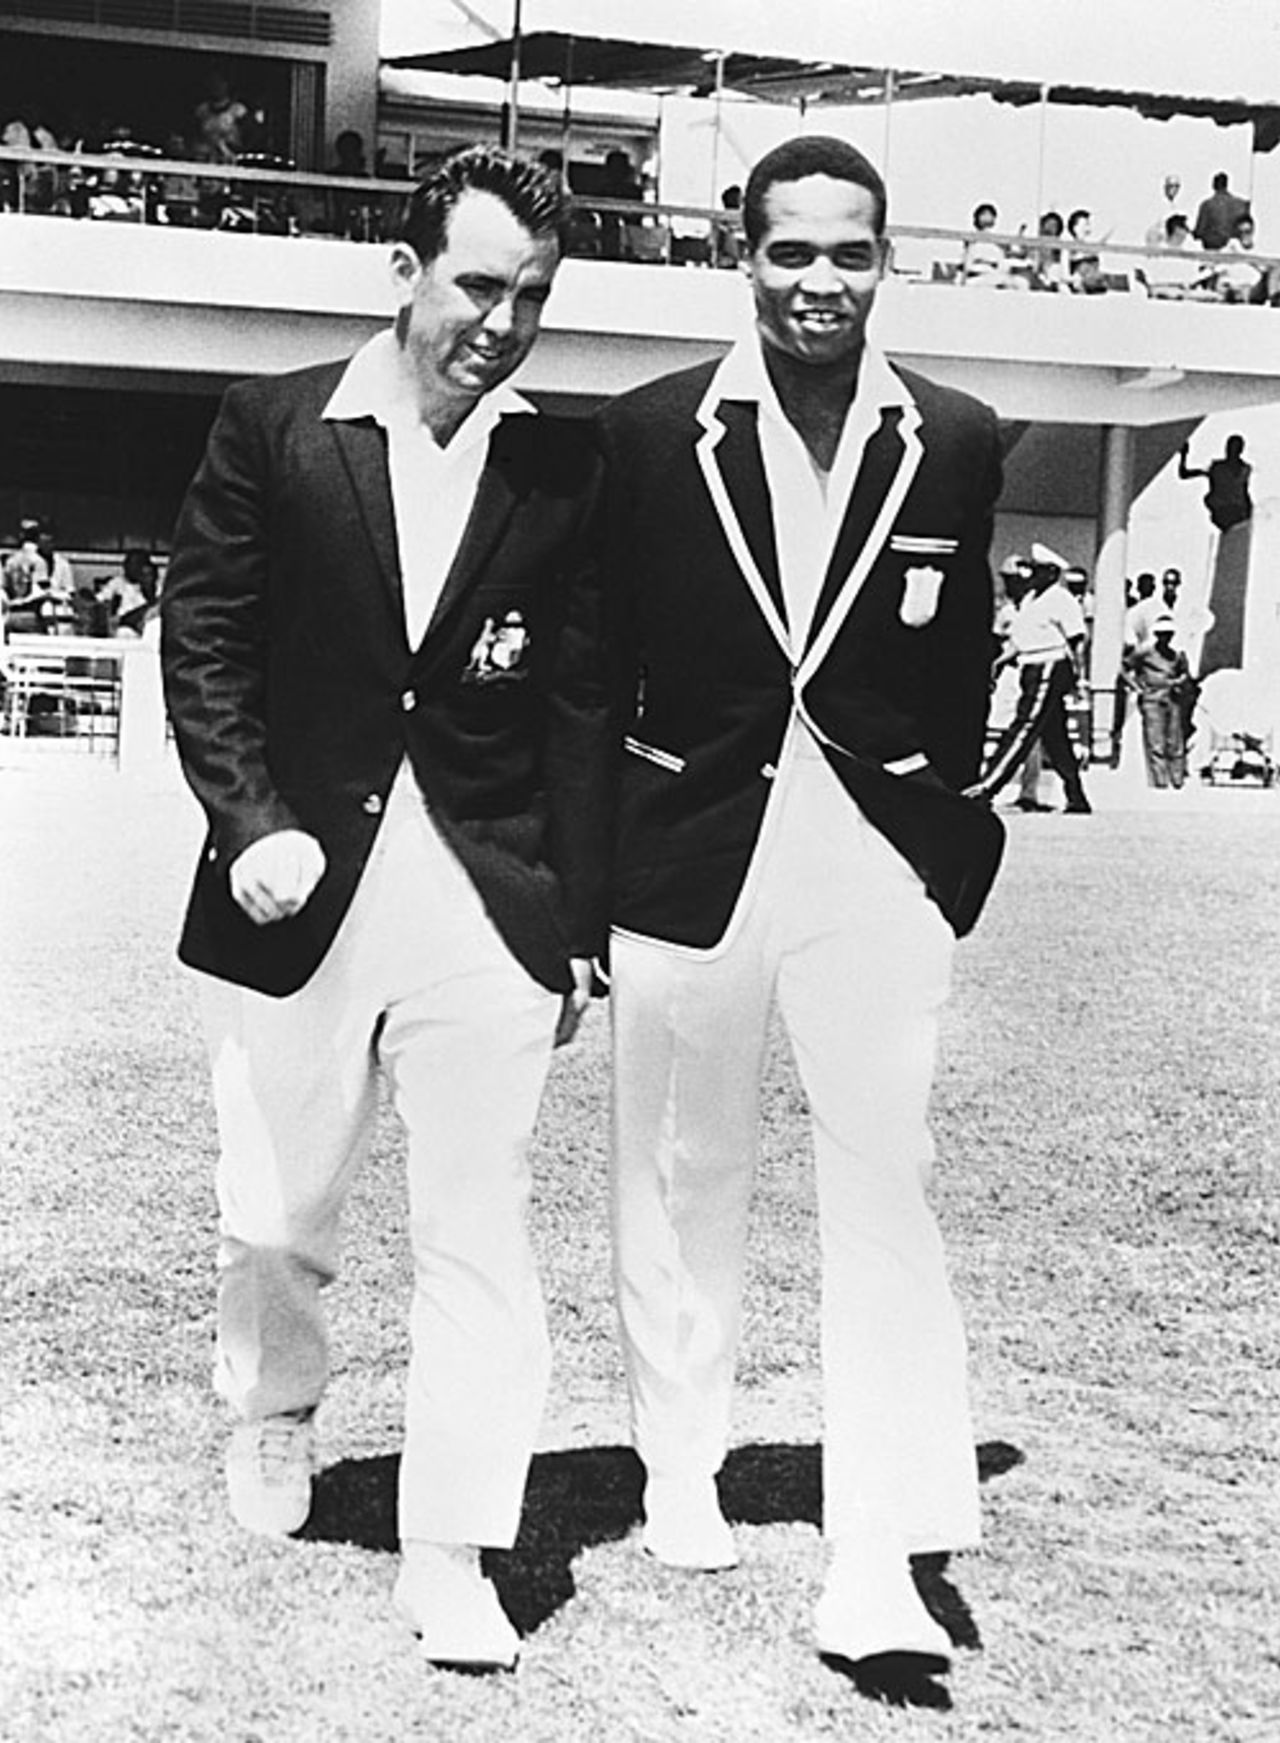 Bob Simpson and Garry Sobers walk out for the toss, March 3, 1965, first Test, Kingston